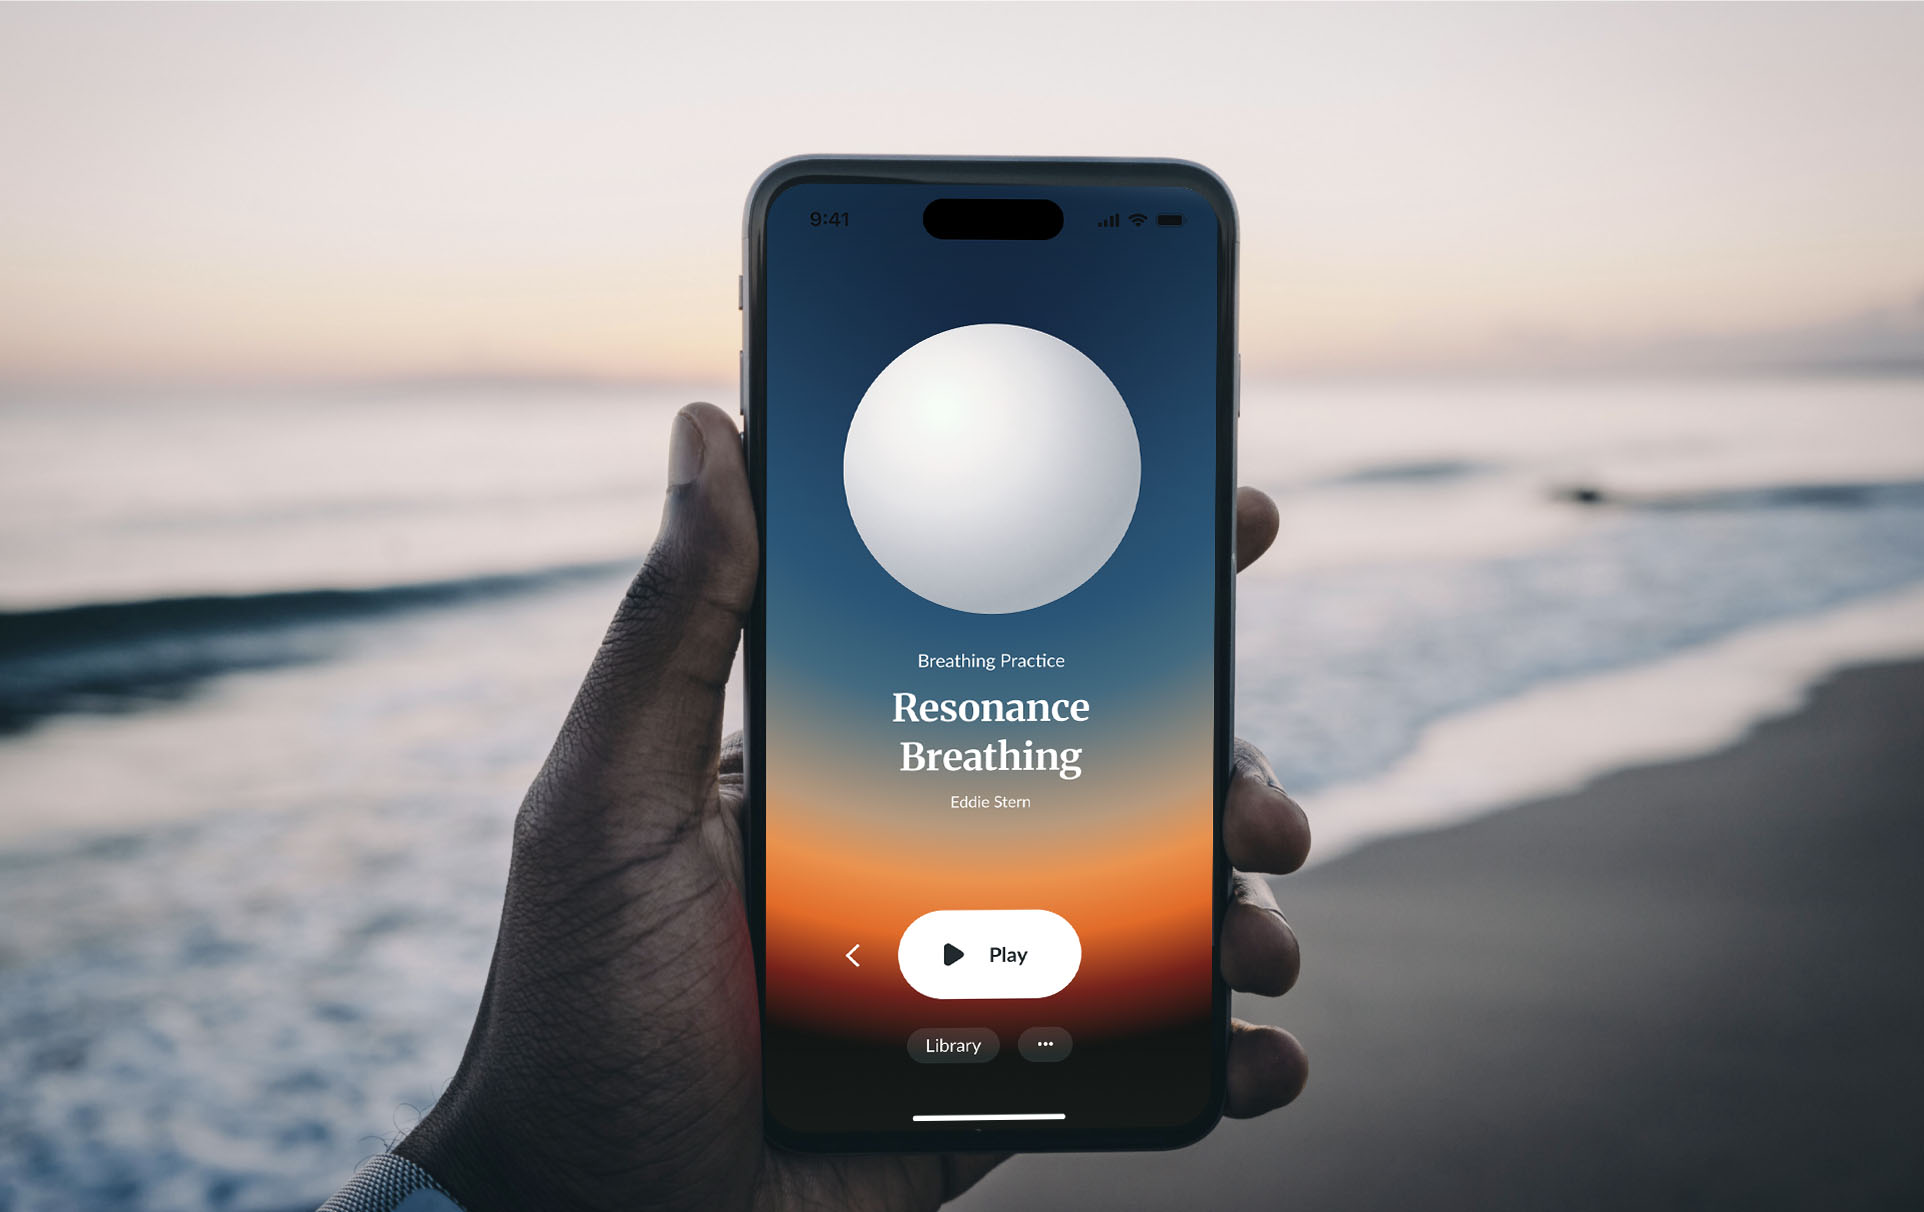 The First Breathing App For Diabetes to Improve the Quality of Life for 537 Million People